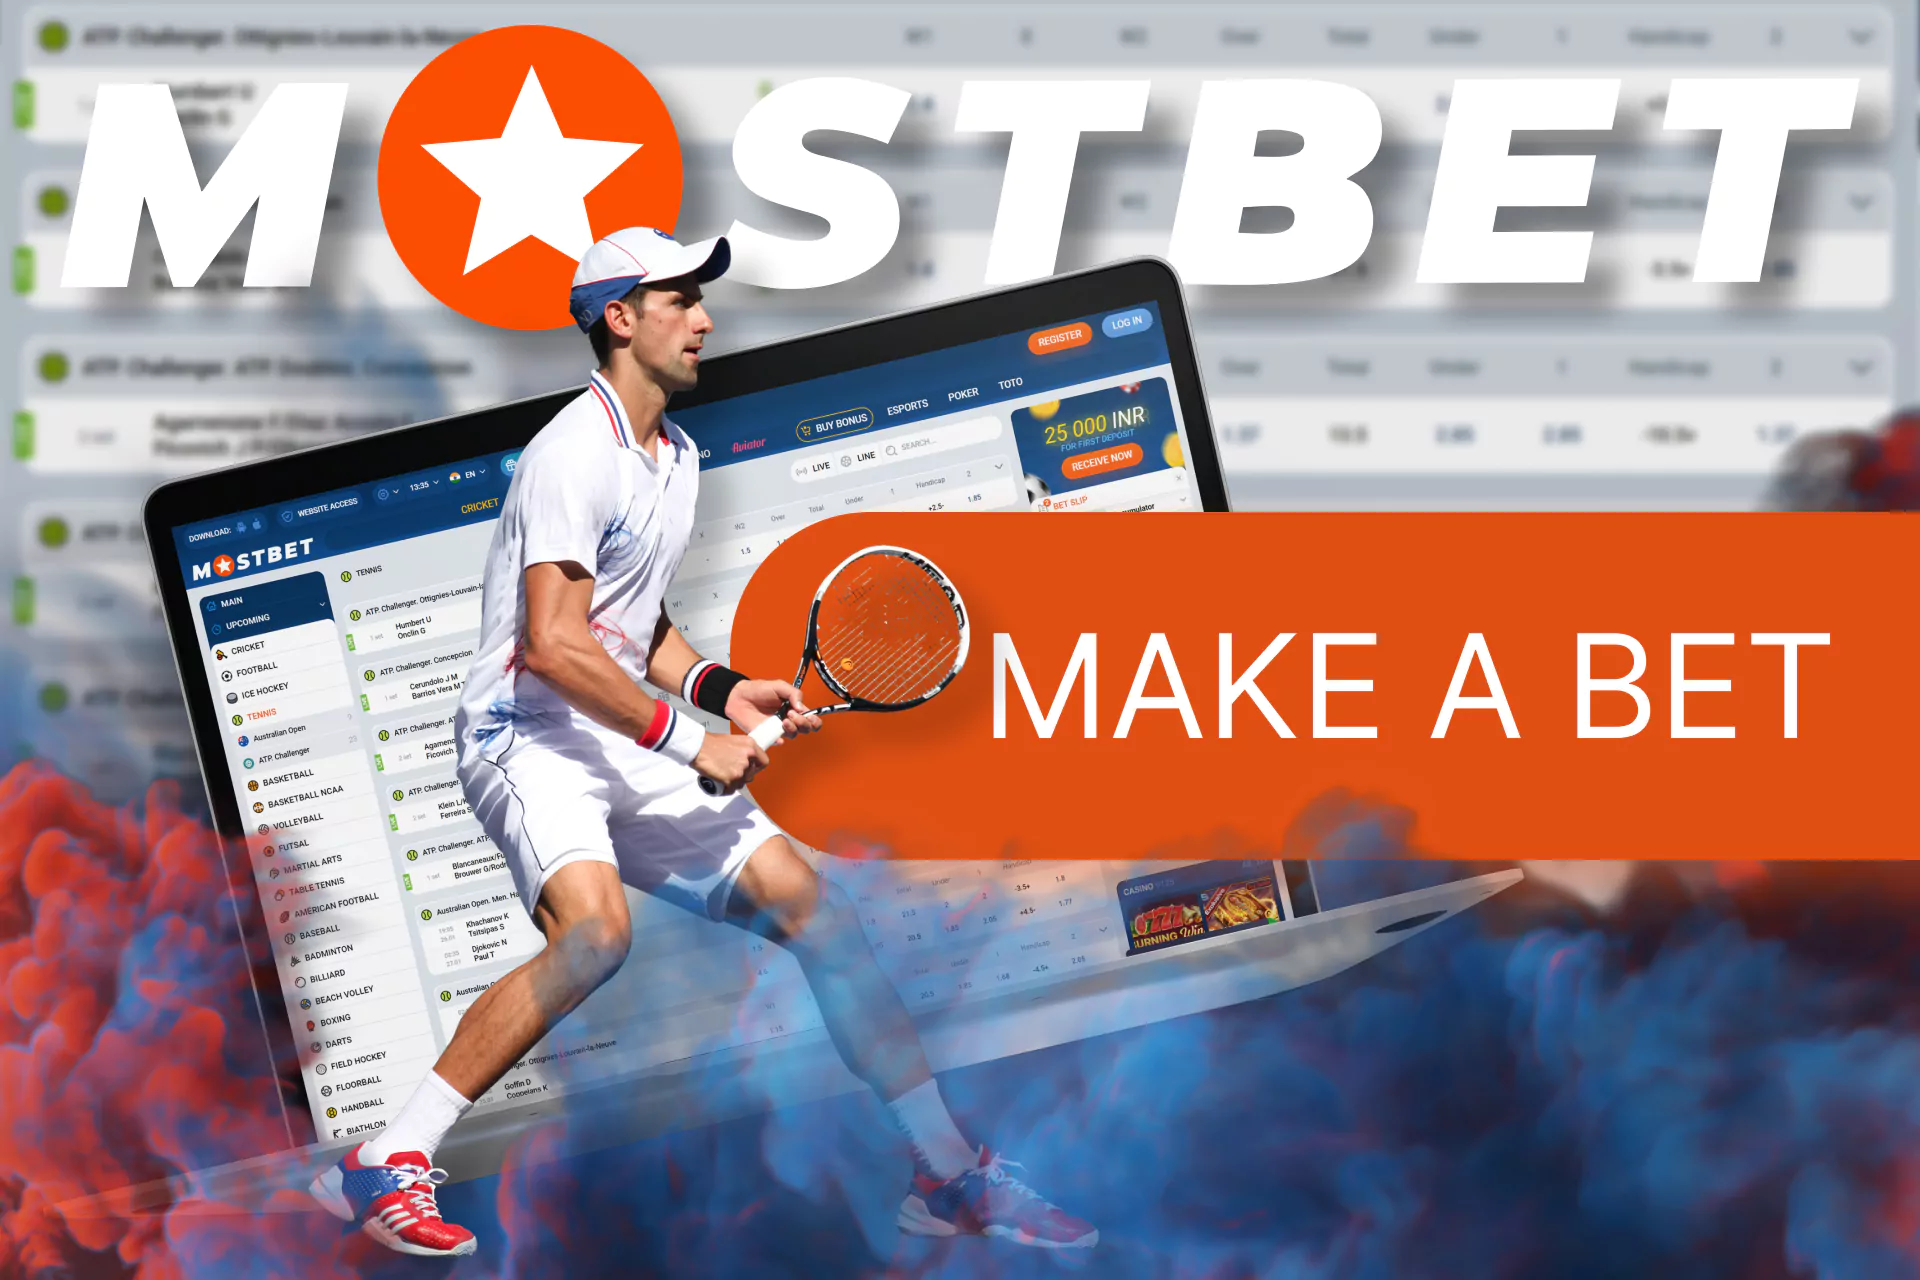 Bet on tennis online with Mostbet.